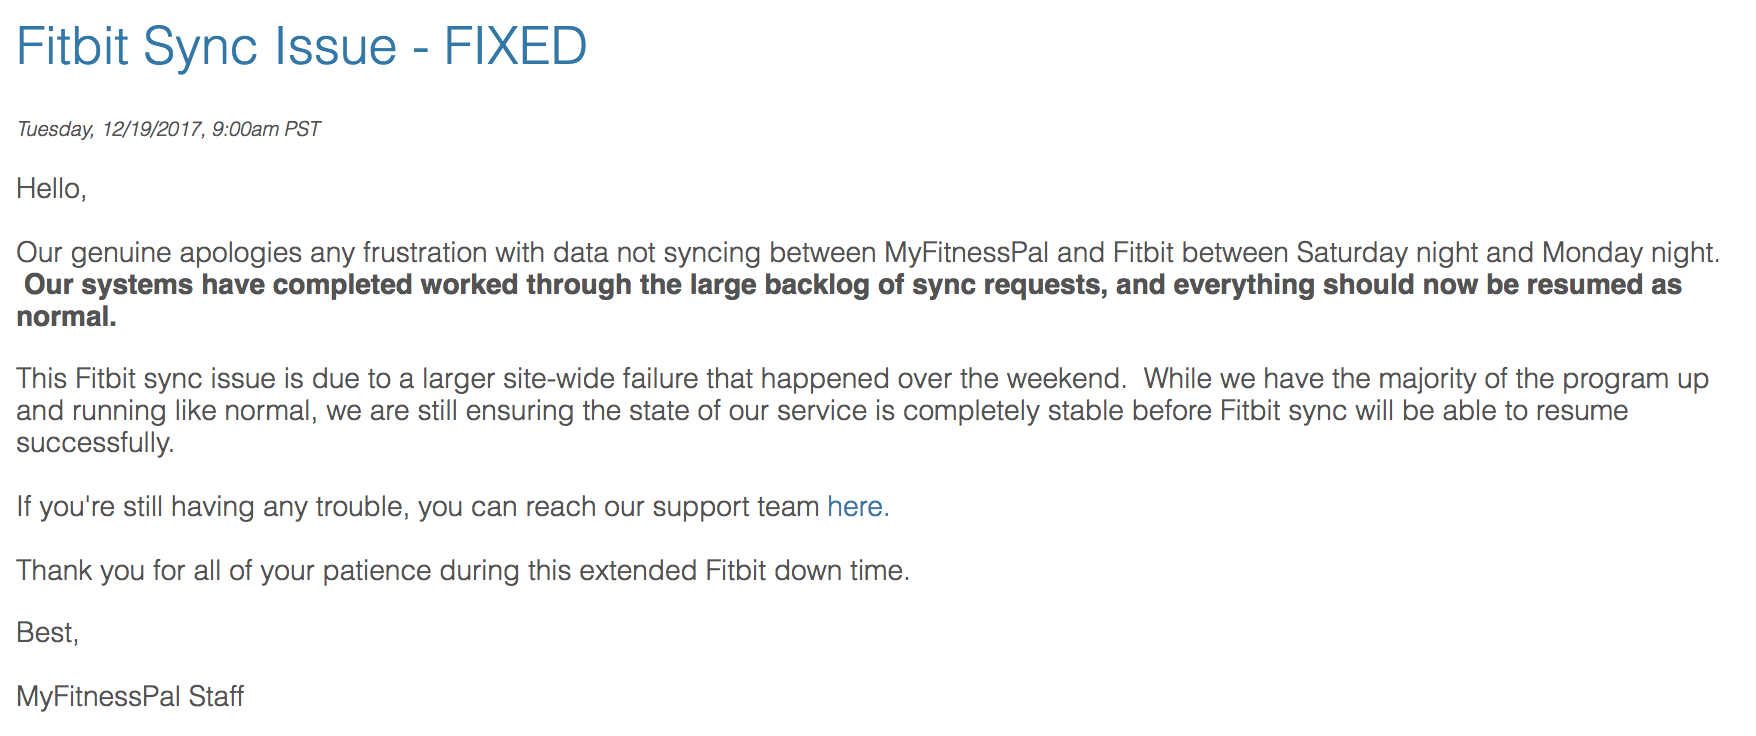 fitbit not syncing with mfp